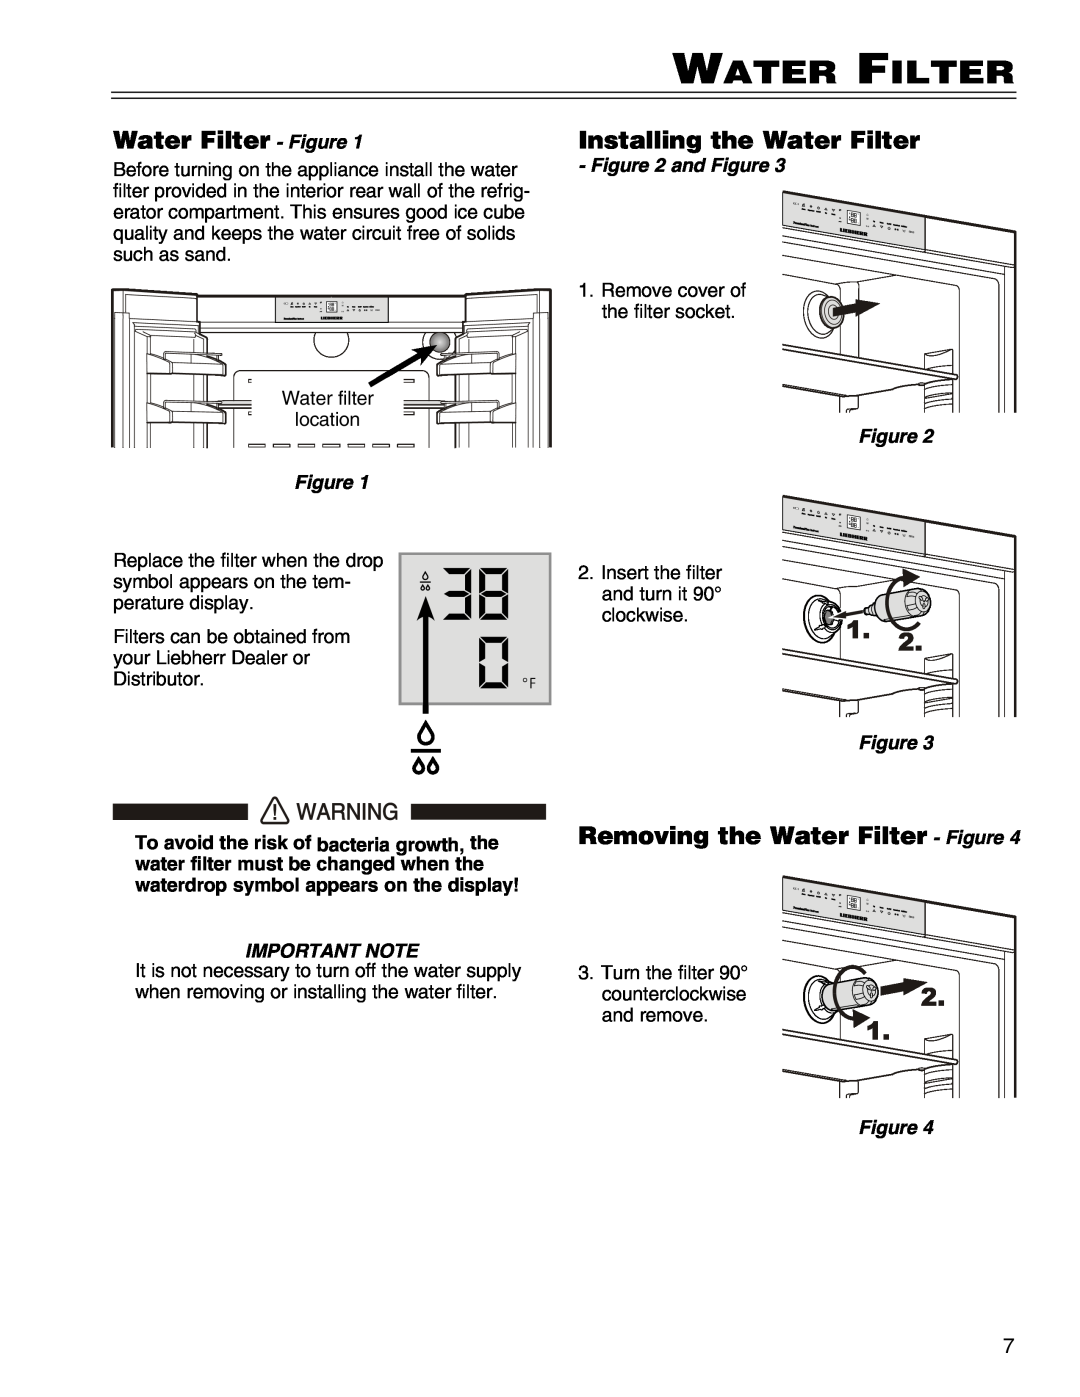 Liebherr HCS manual Installing the Water Filter, Removing the Water Filter - Figure, and Figure, Important Note 